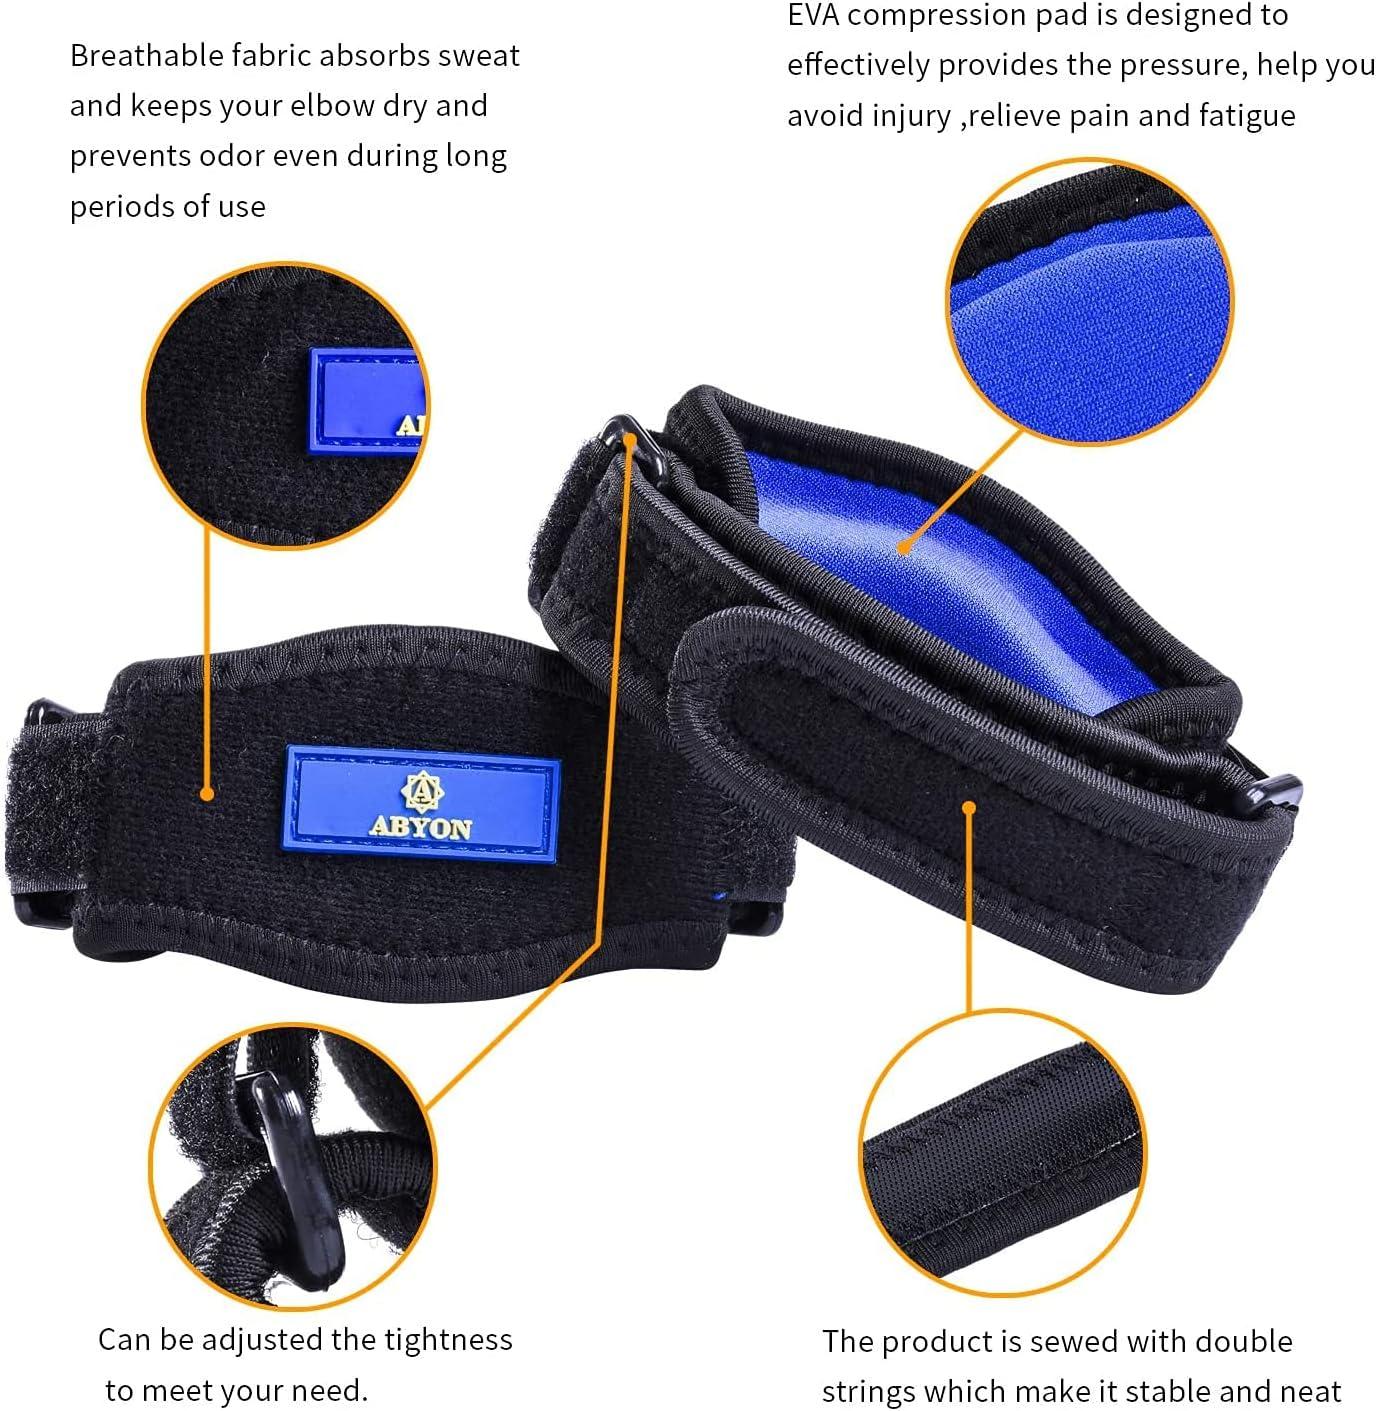 ABYON Back Brace for Lower Back Pain Relief with Support Stays